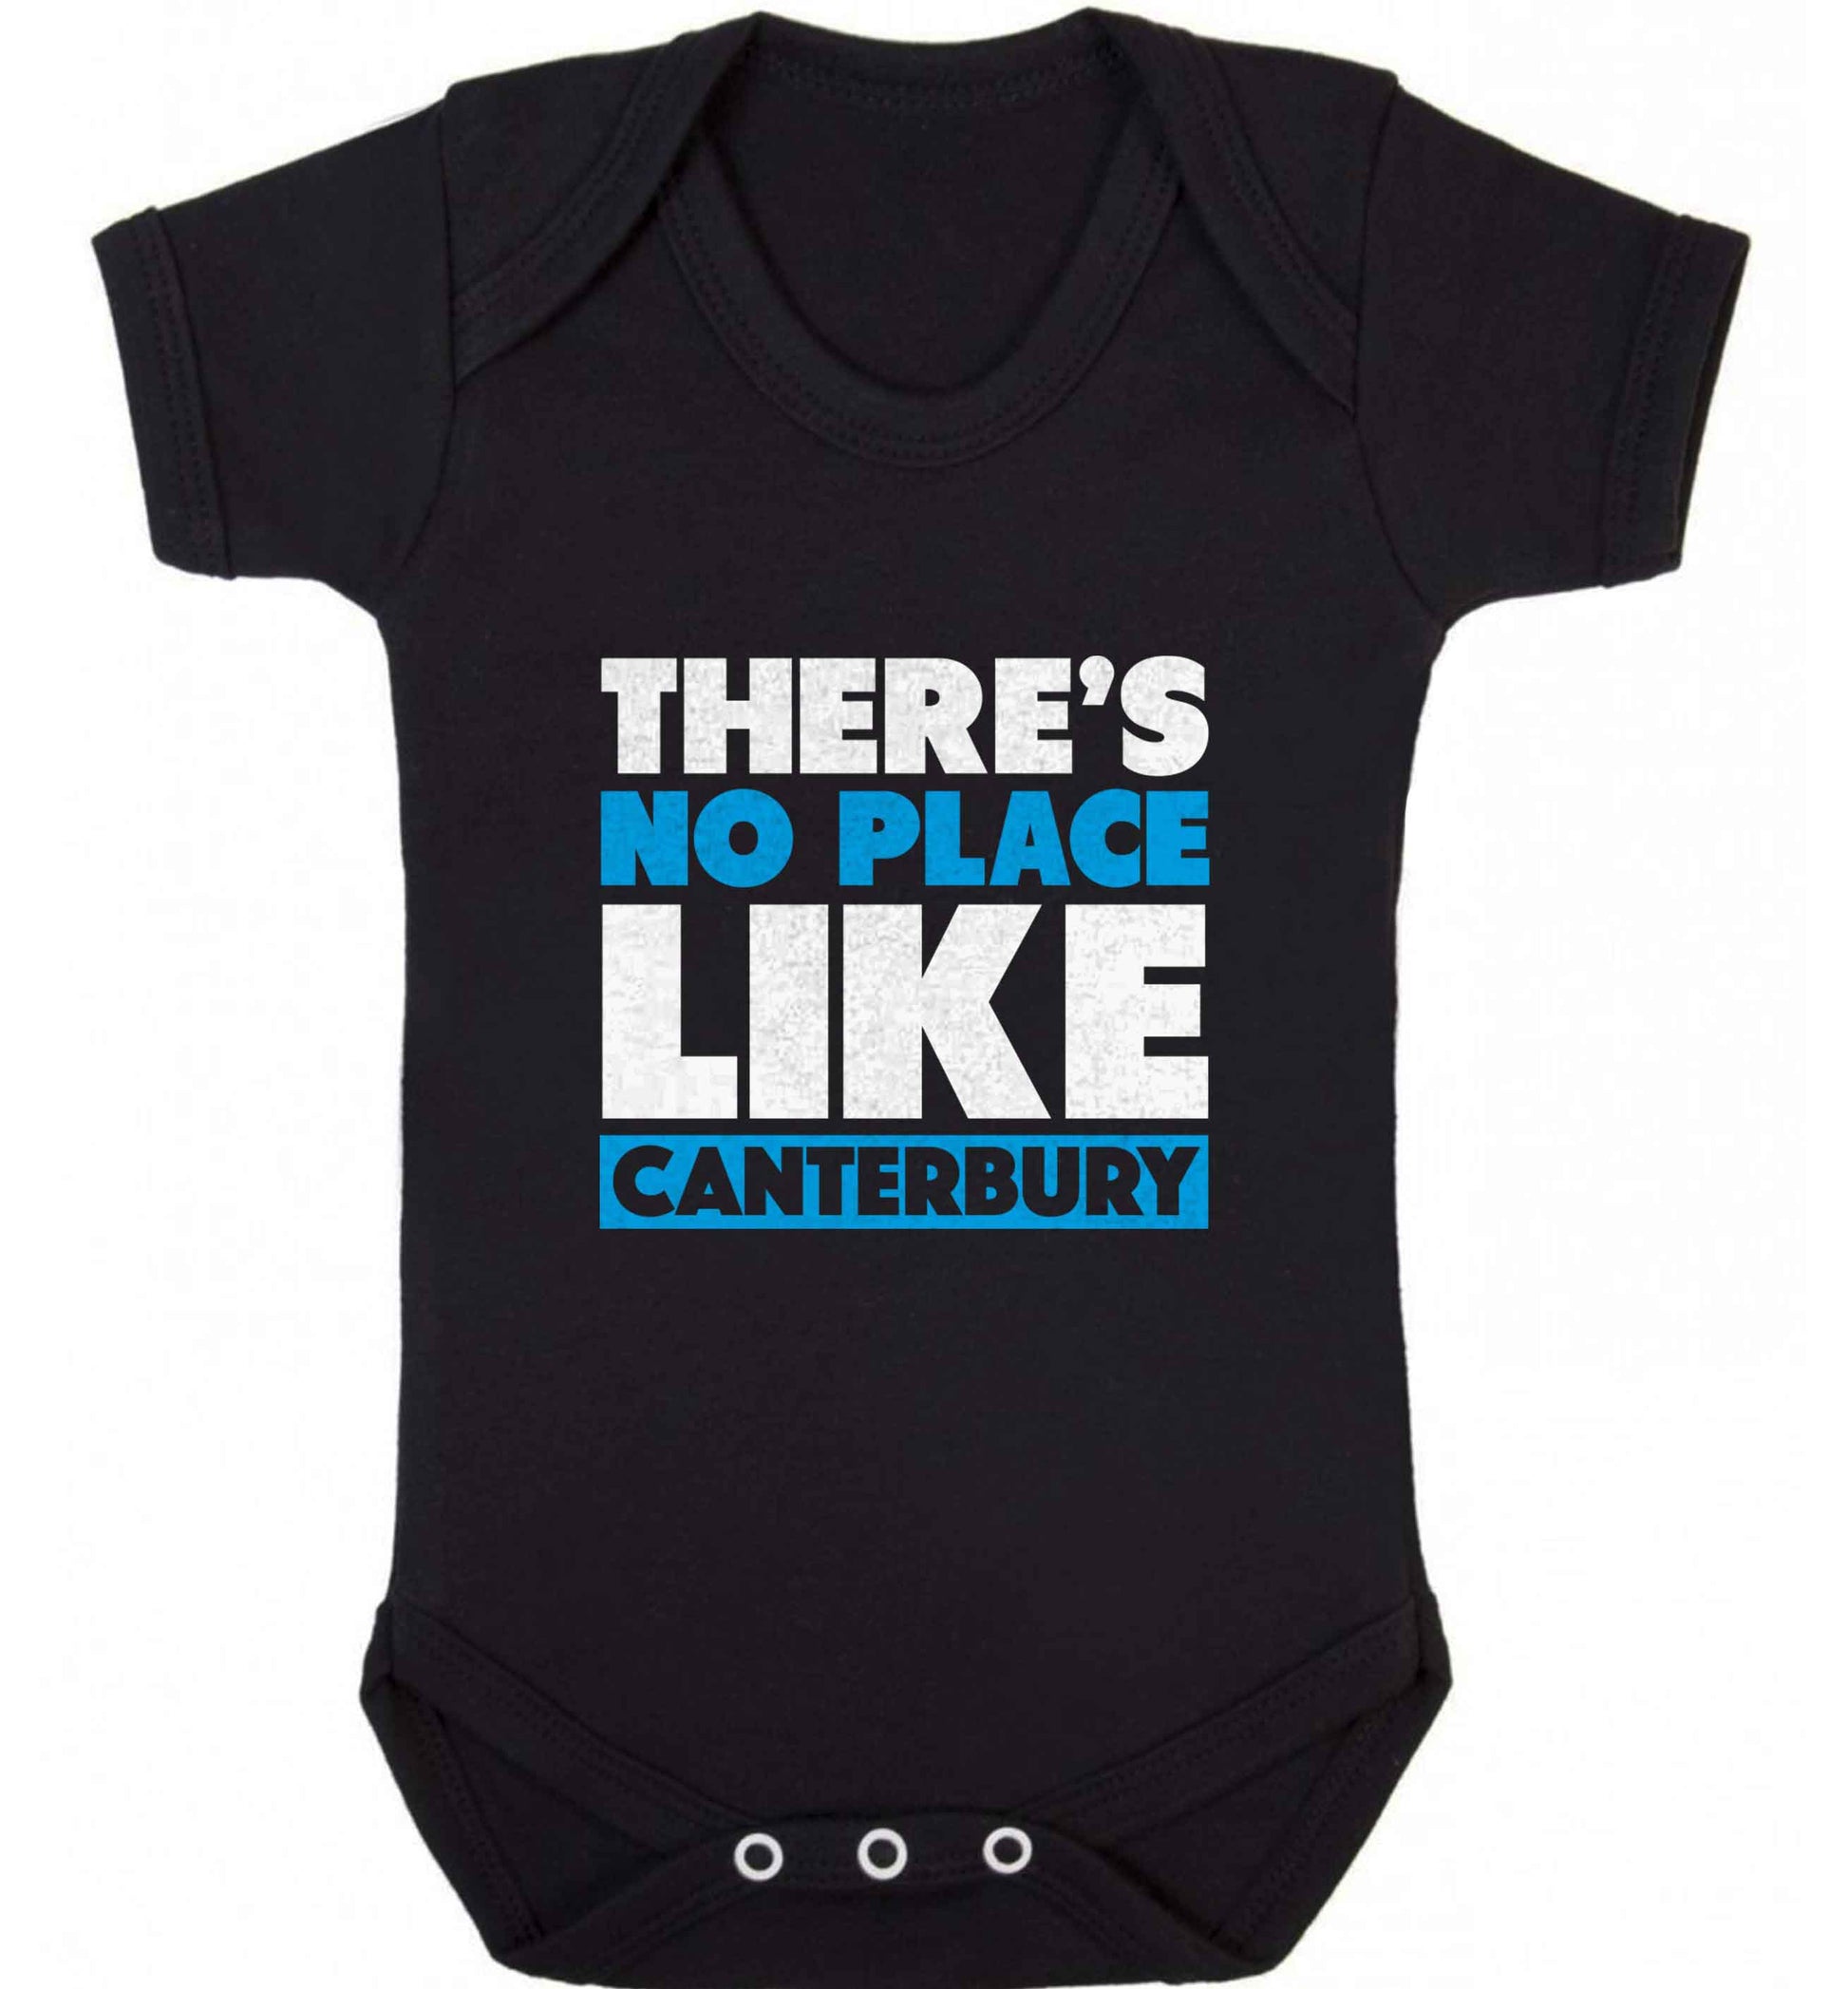 There's no place like Canterbury baby vest black 18-24 months